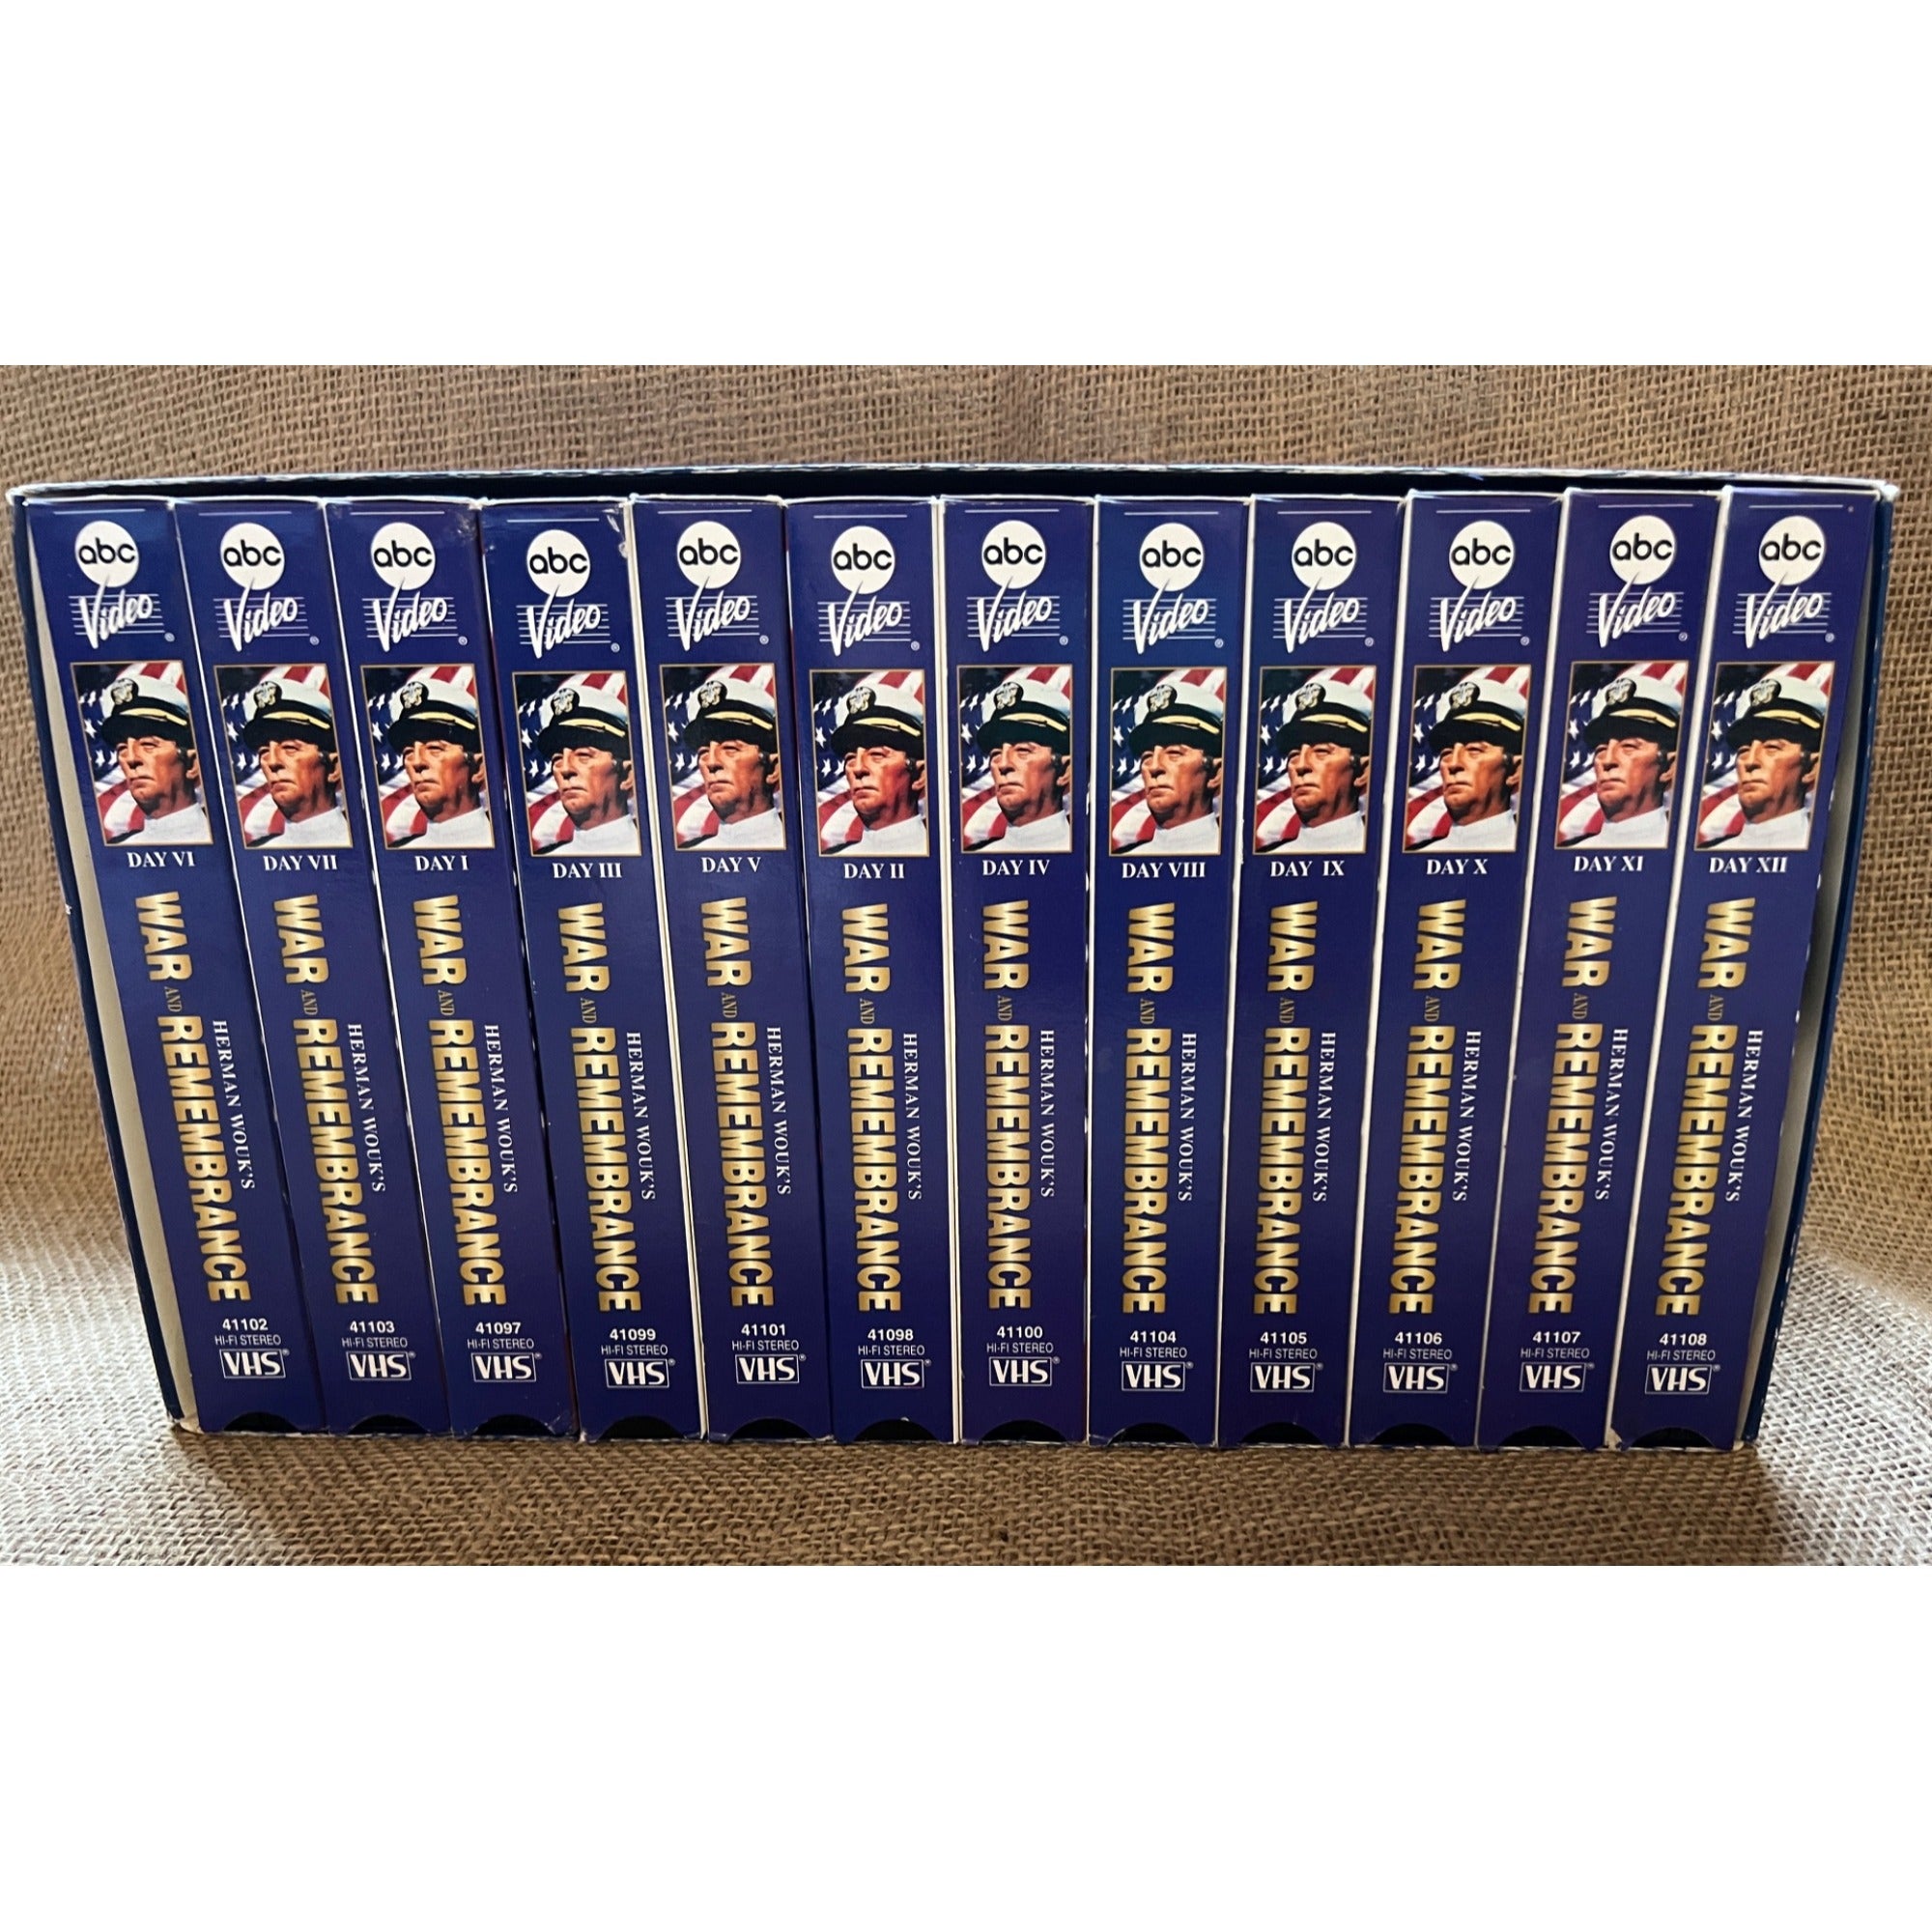 Herman Wouk's War & Remembrance 12 VHS Complete Miniseries Collection Set